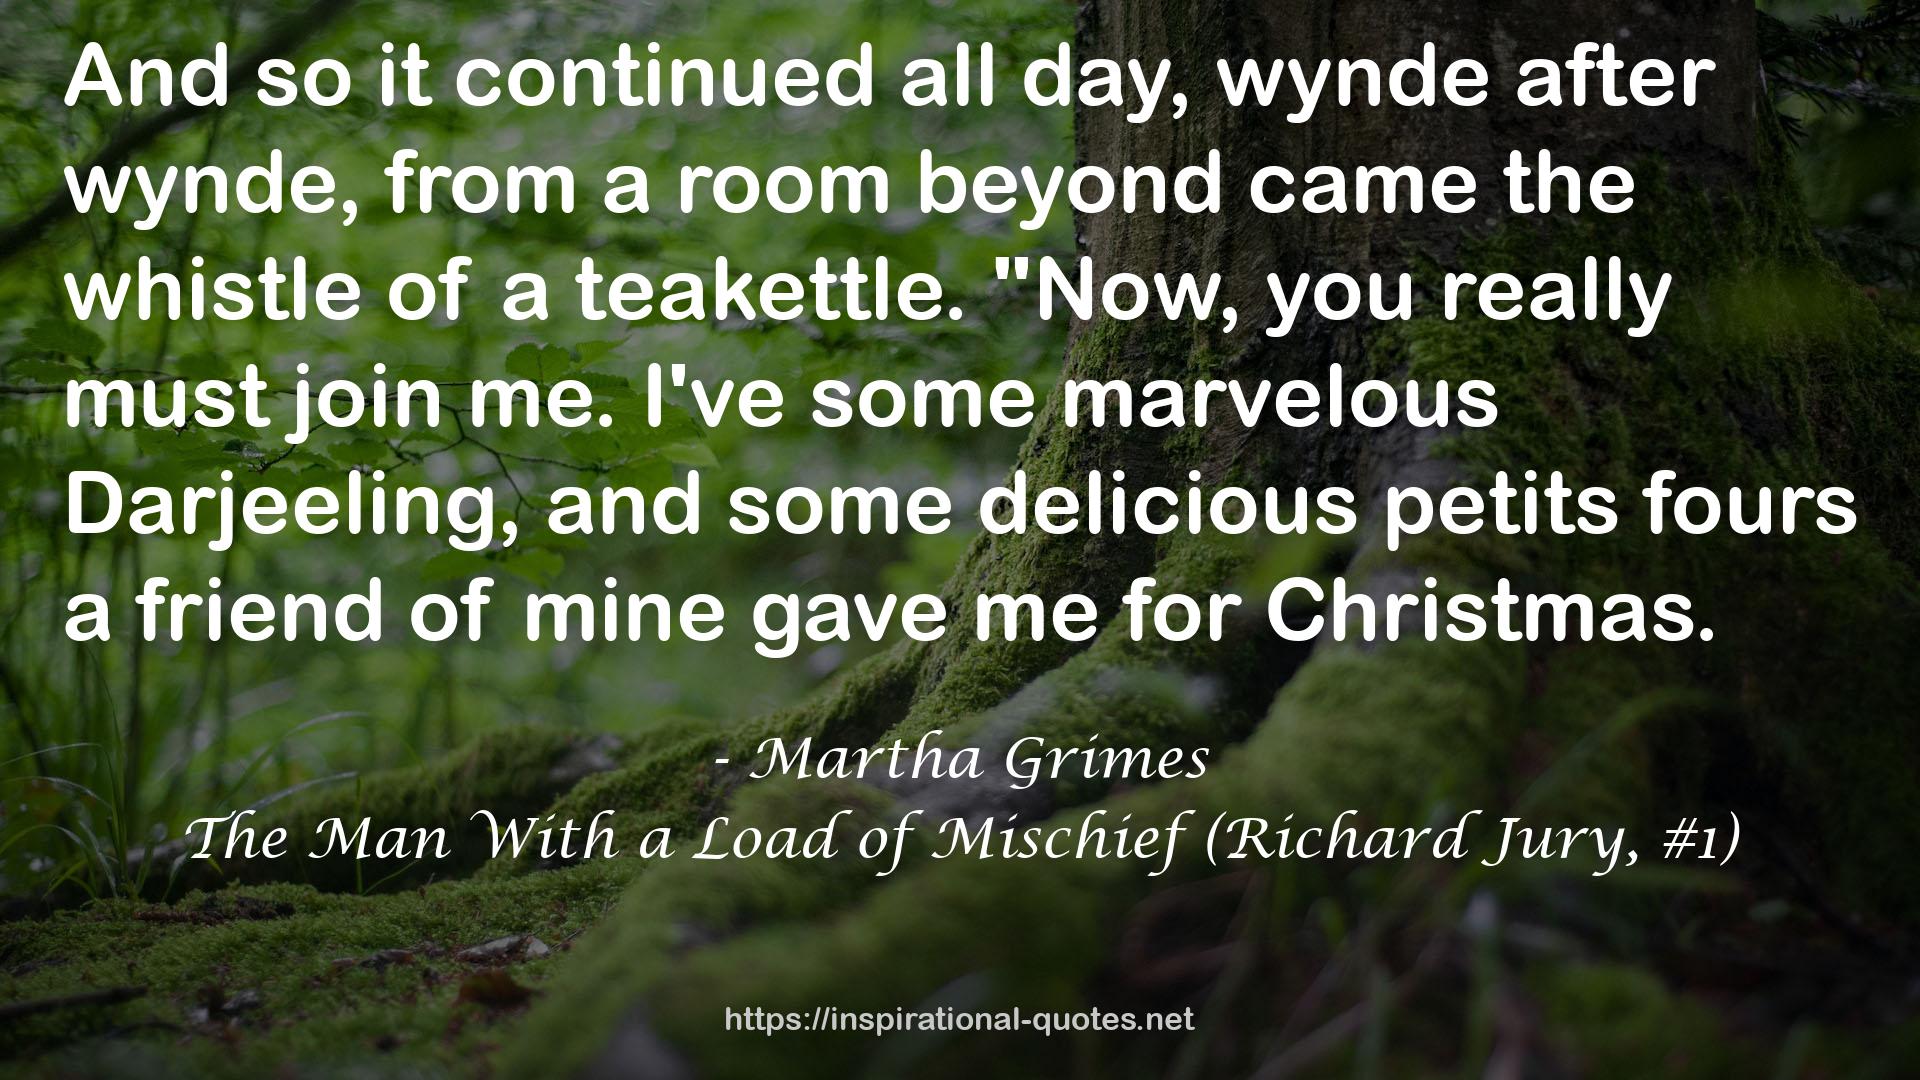 The Man With a Load of Mischief (Richard Jury, #1) QUOTES